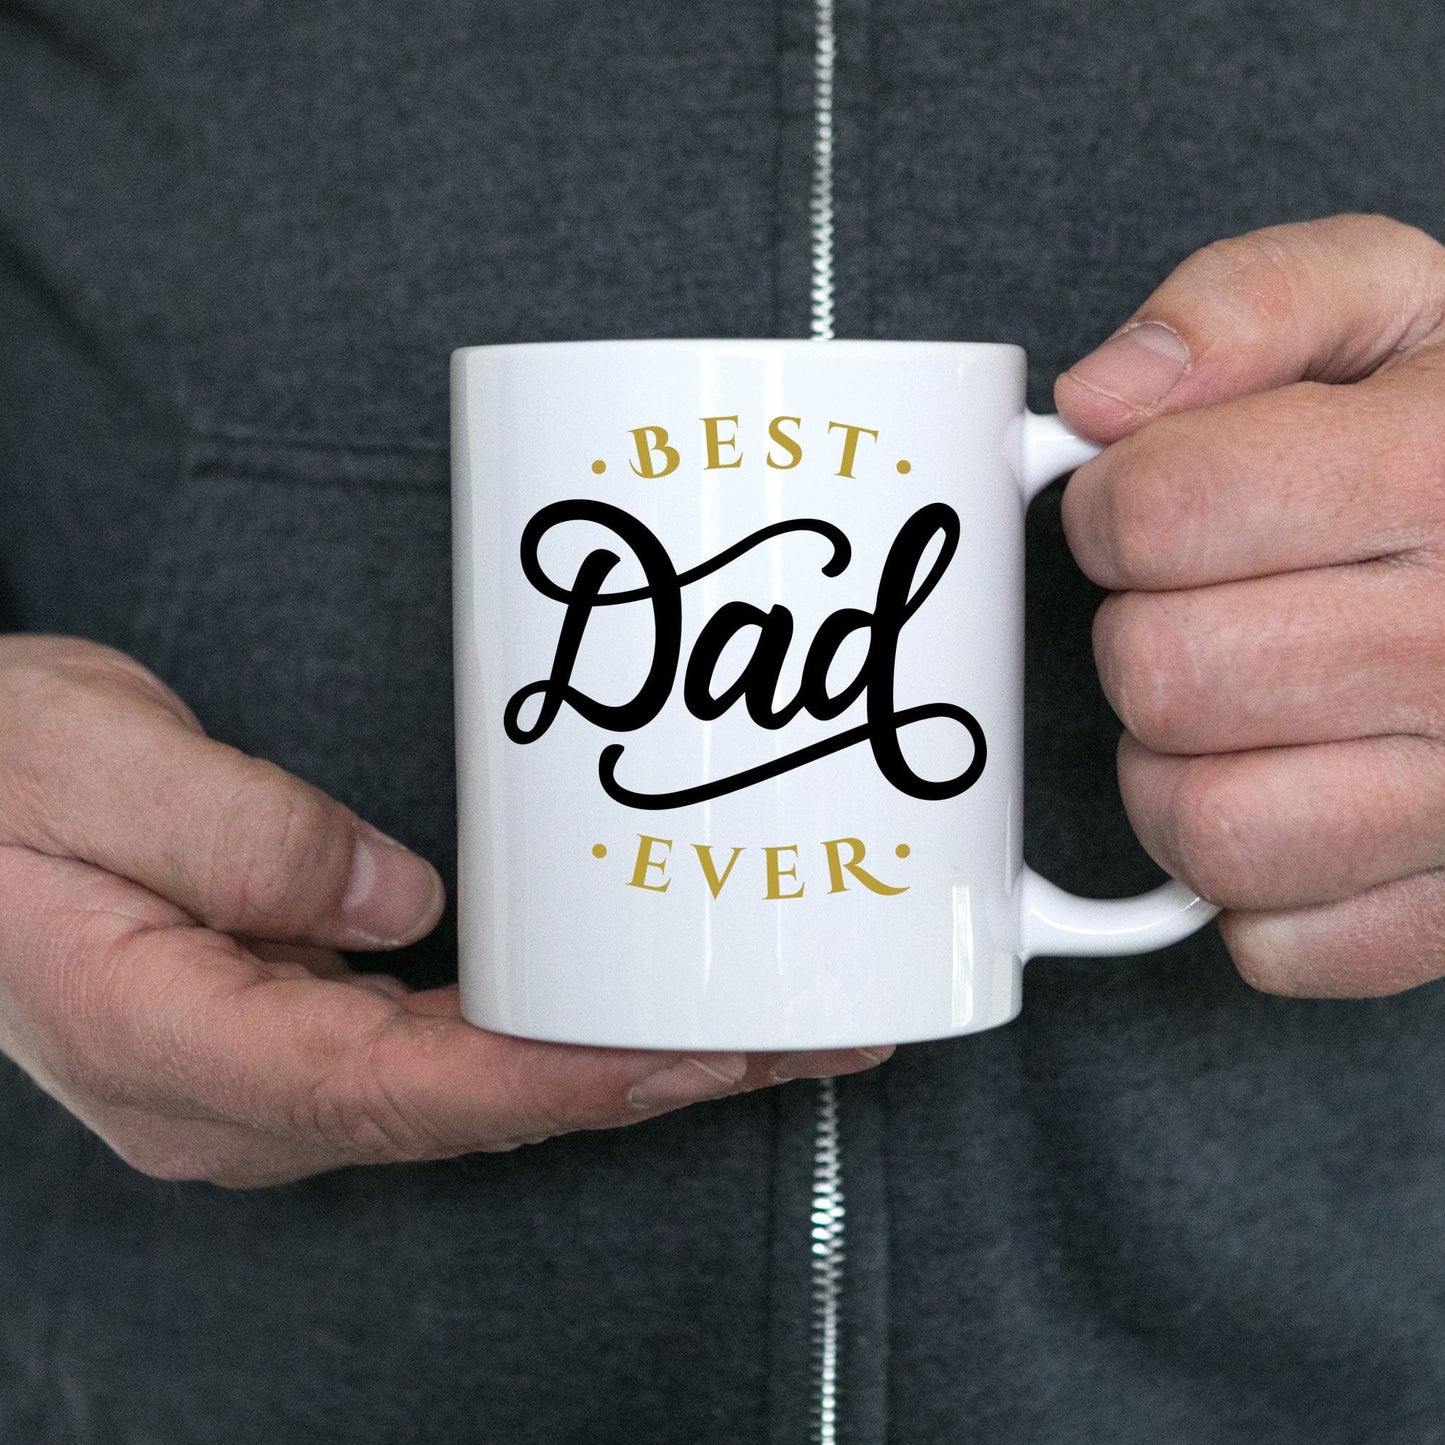 Best Father's Day Mug - Best Dad Ever